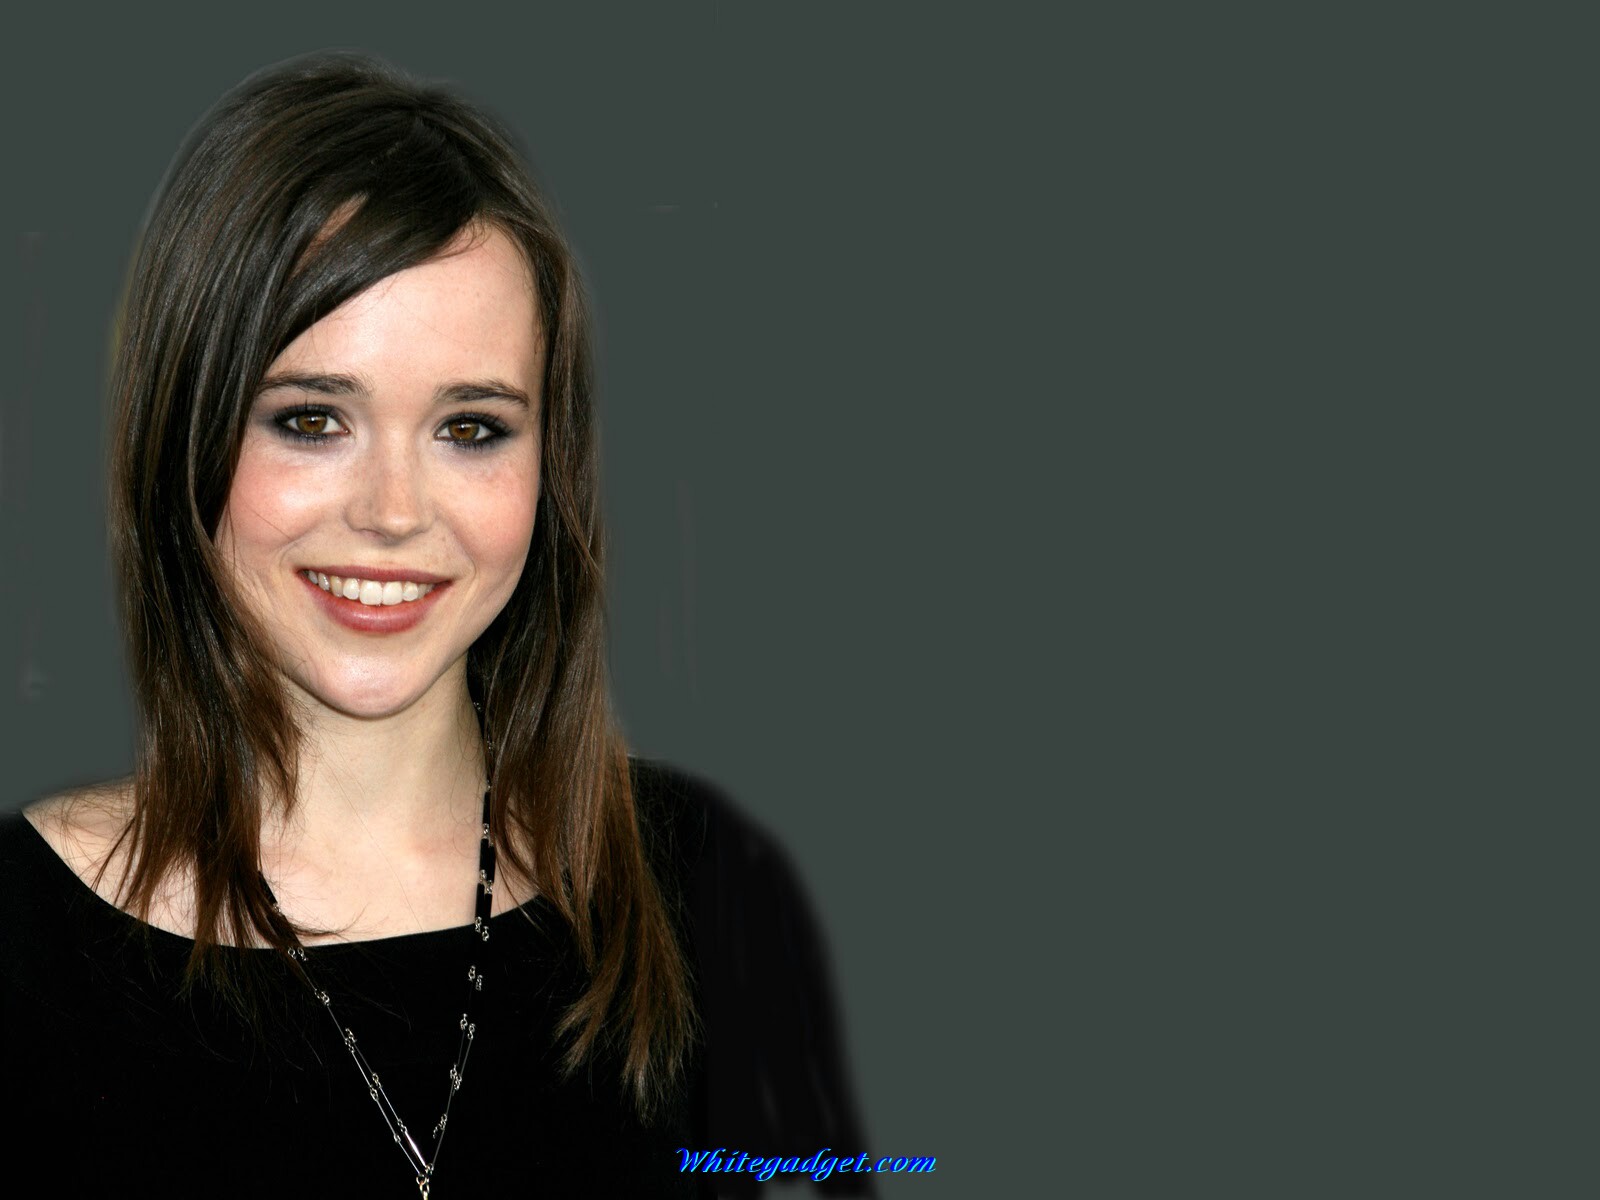 Free Download Ellen Page Wallpaper 1920x1200 Wallpapers 1920x1200 Wallpapers [1920x1200] For